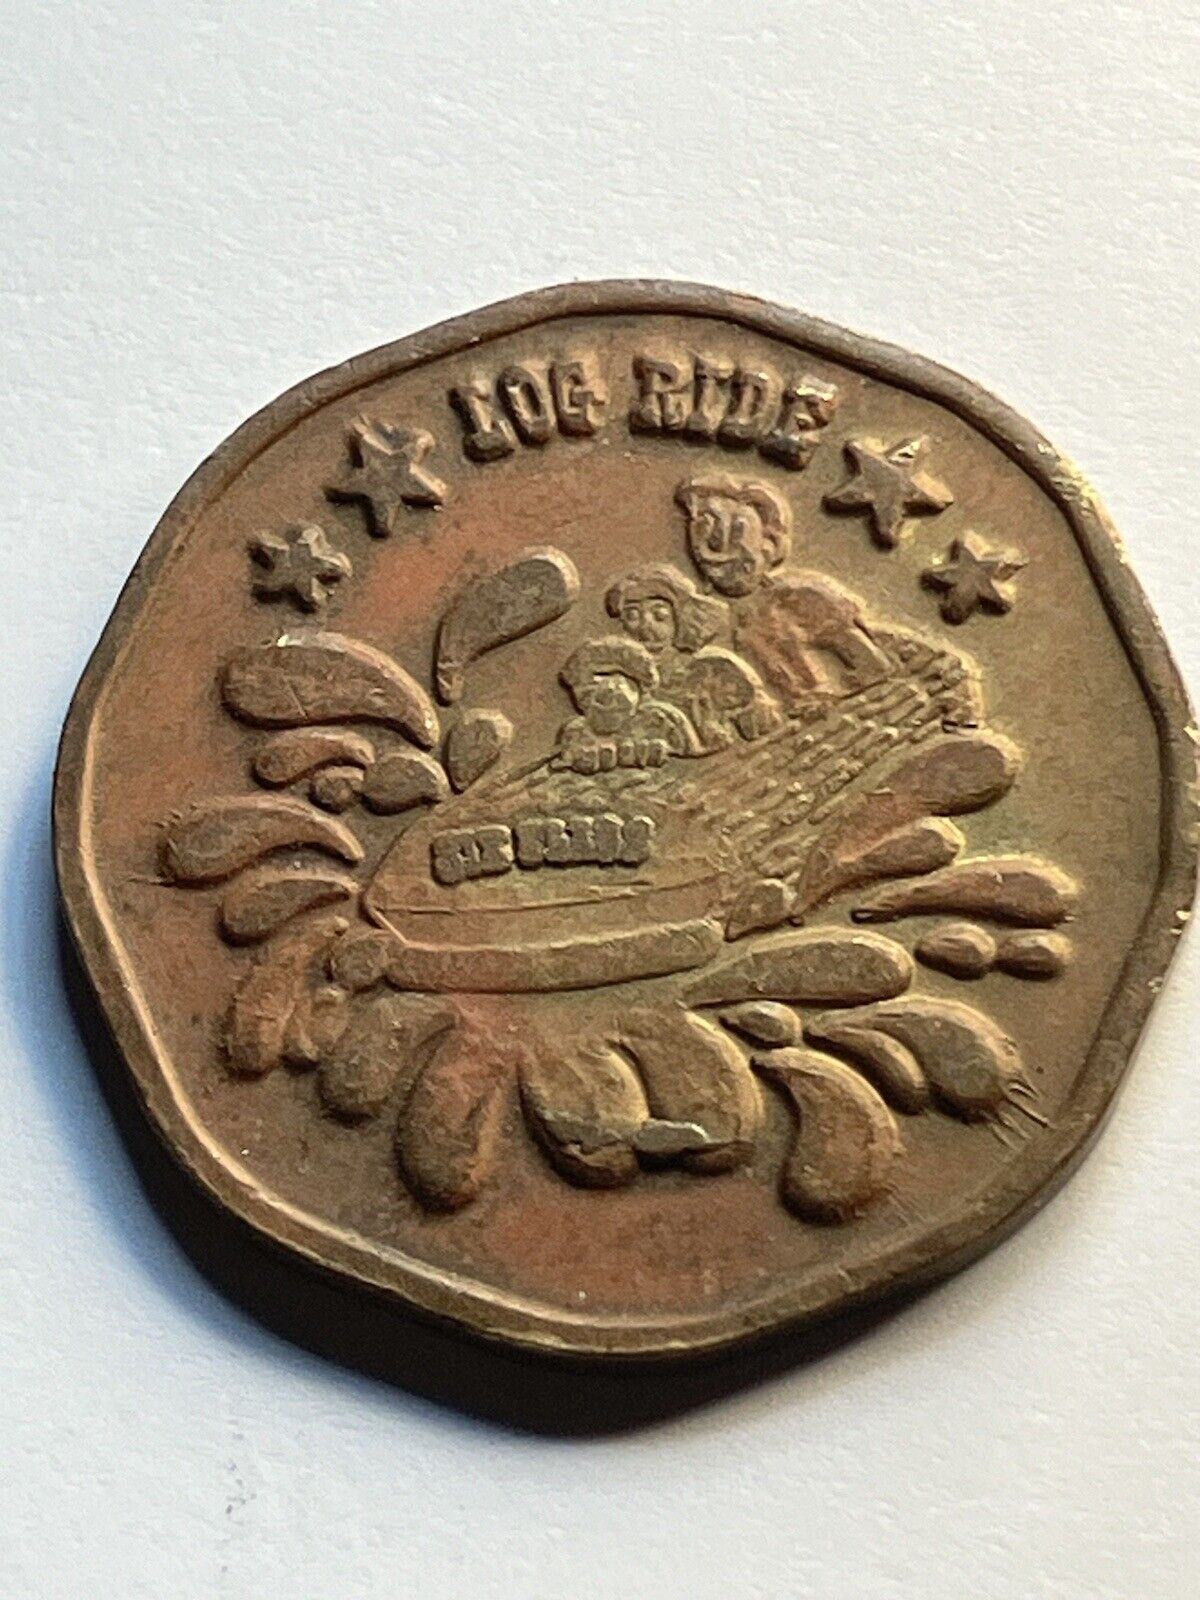 Vintage 8-sided Six Flags Log Ride Token #sv1